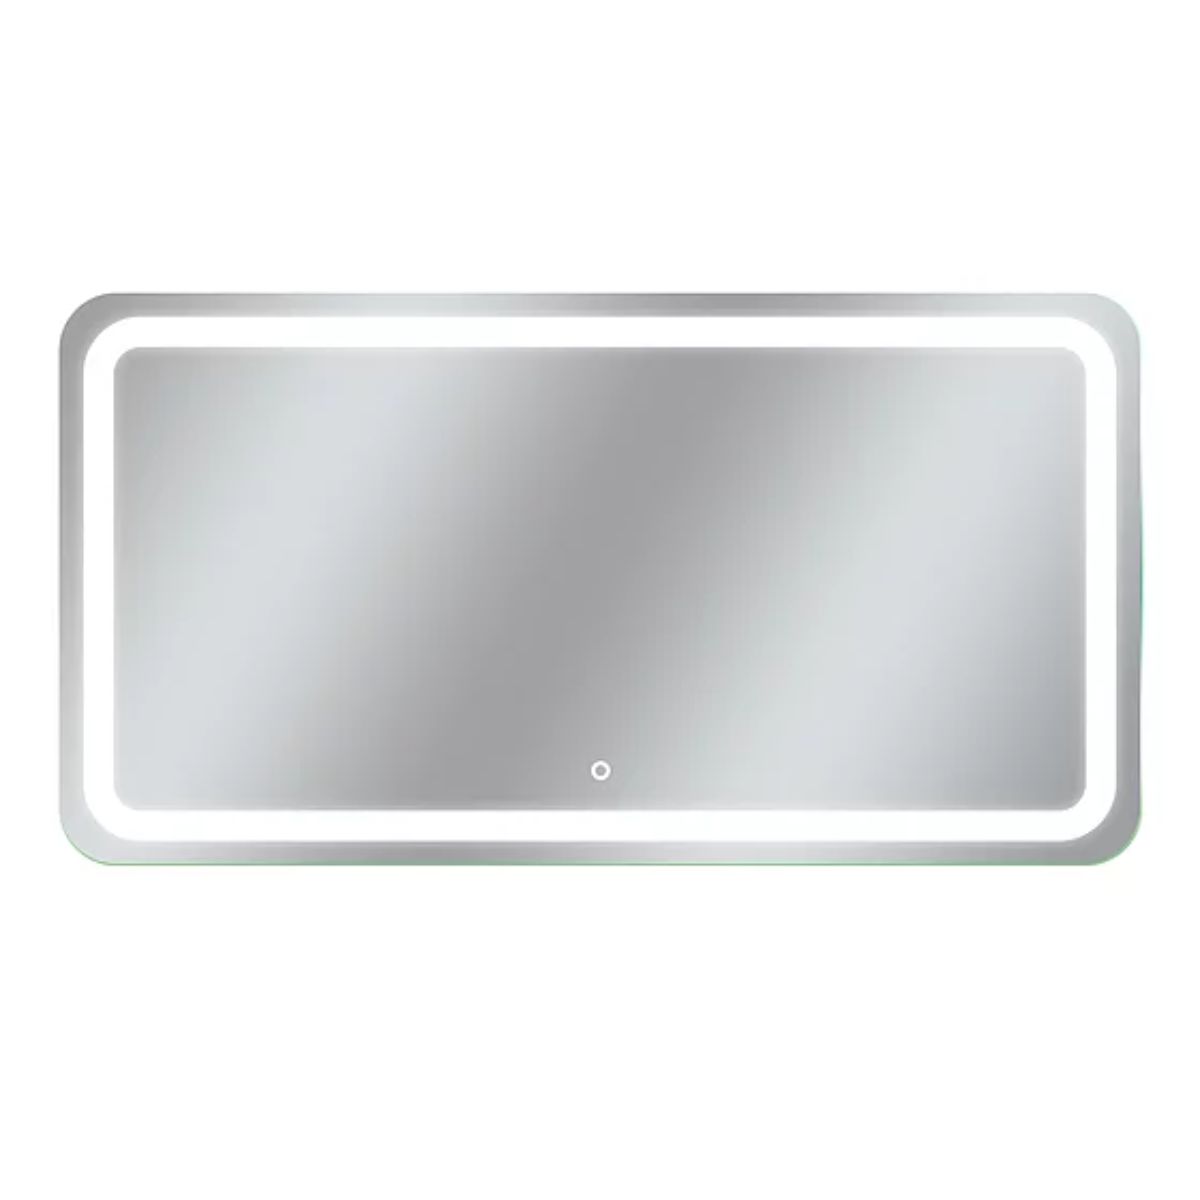 Egret 72 in. x 38 in. LED Wall Mirror with Touch On/Off Function